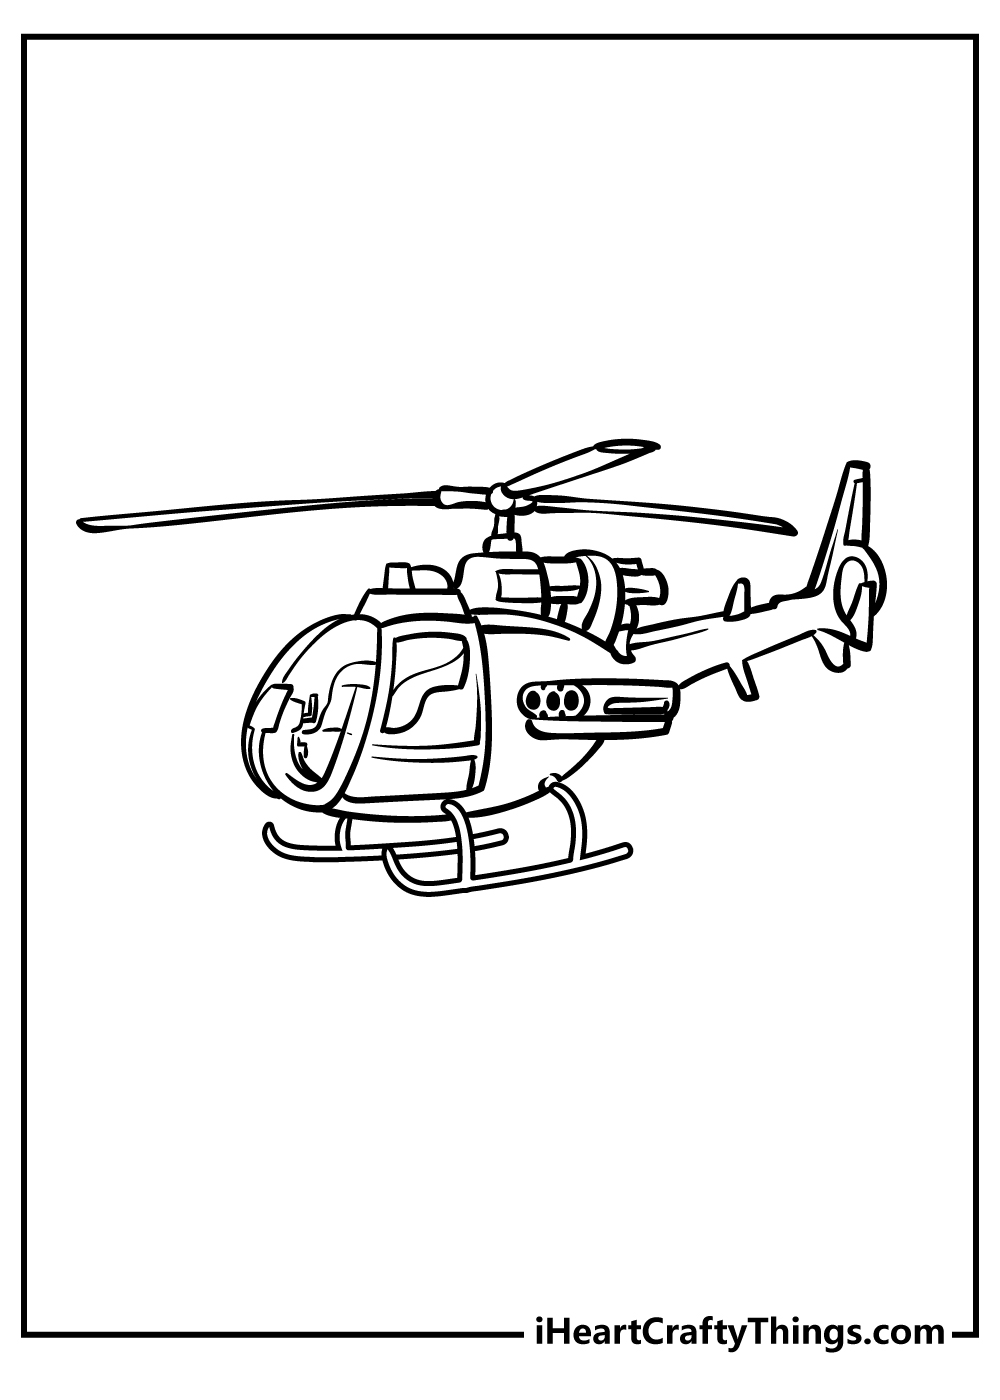 Helicopter Coloring Pages free pdf download